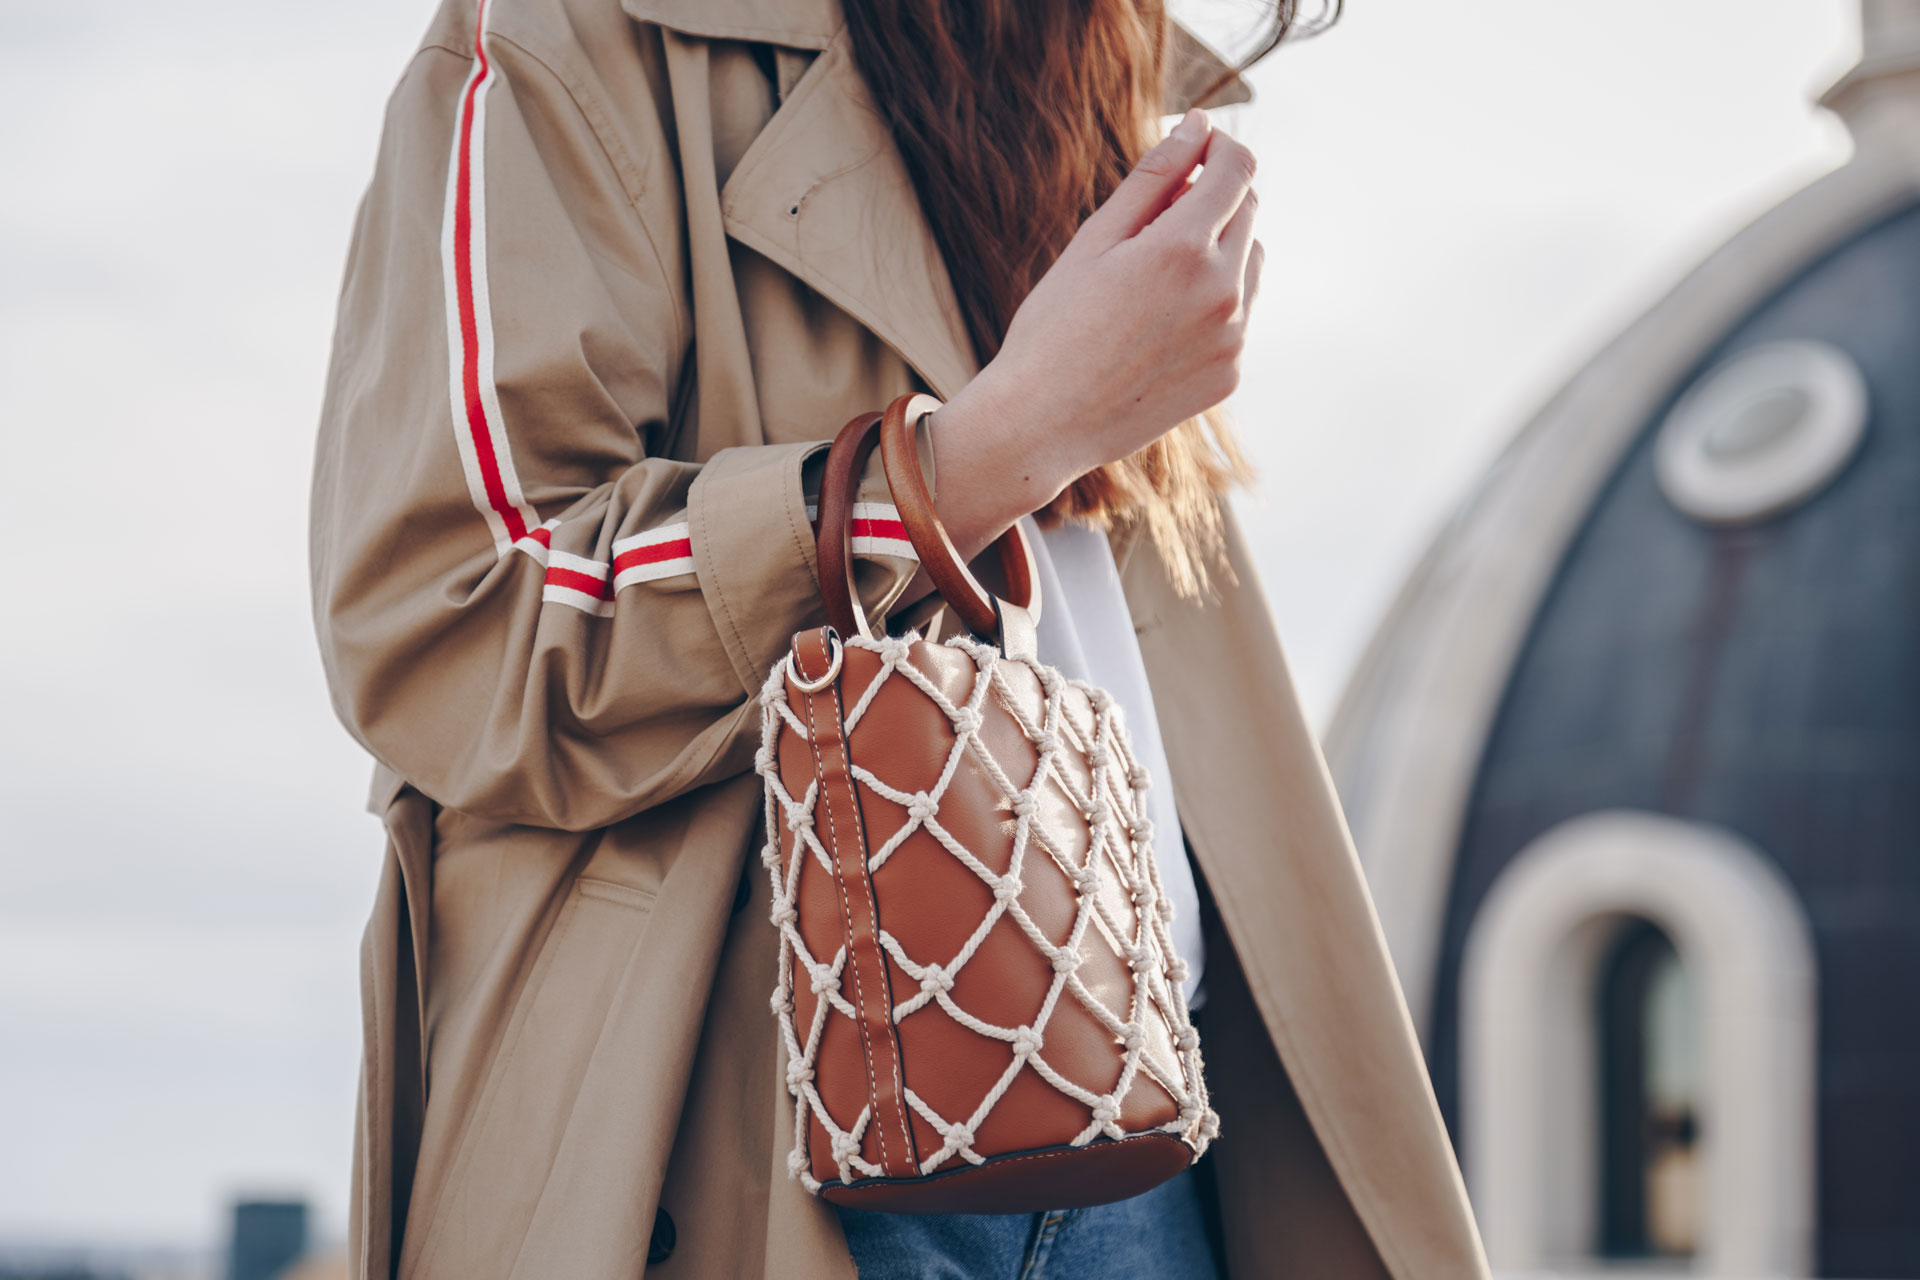 street style fashion details. an attractive woman wearing a beige trench  coat and 90s pattern vintage shoulder mini bag, crossing the street.  fashion outfit perfect for autumn Stock Photo